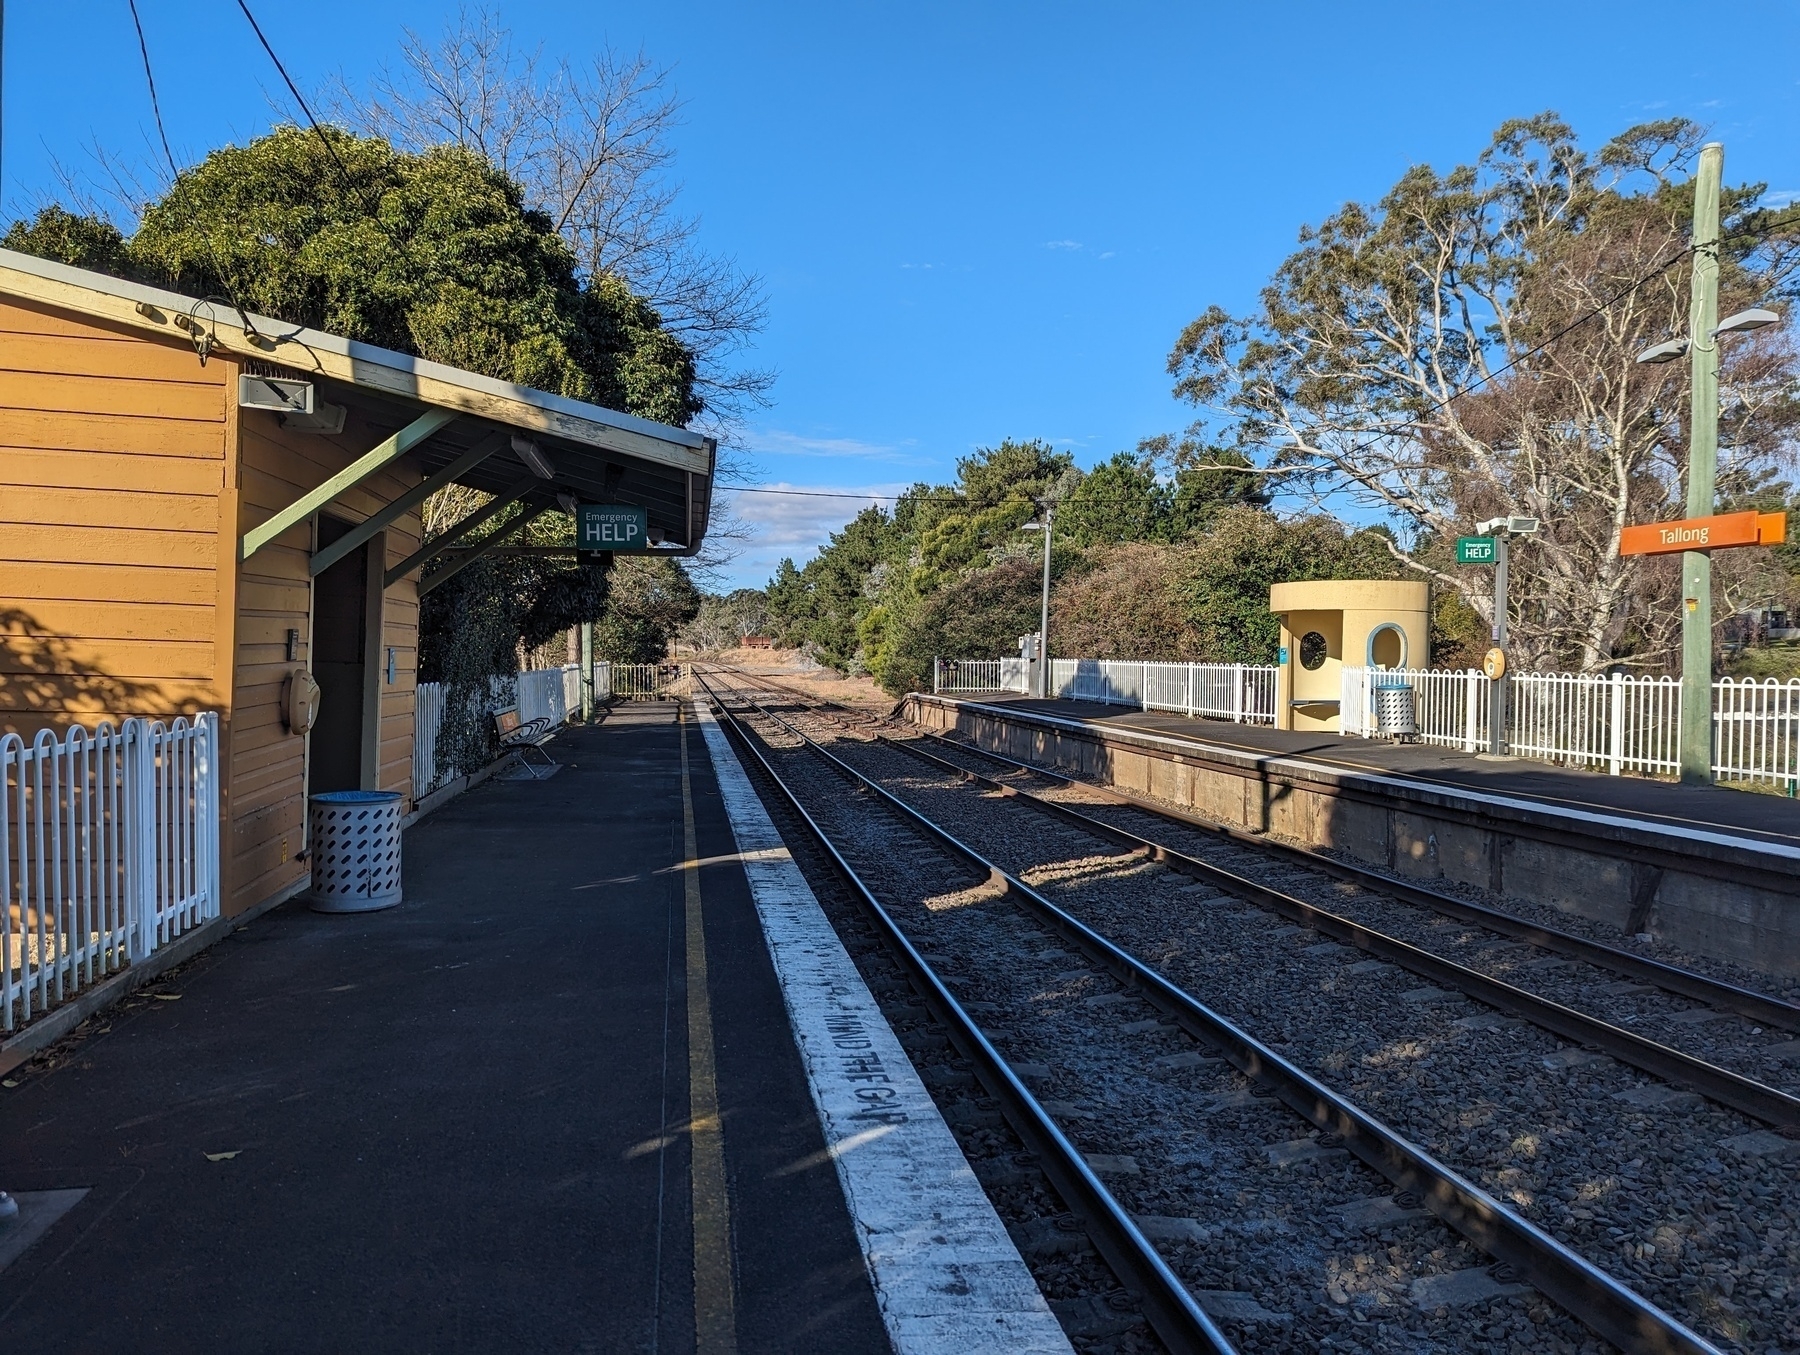 Auto-generated description: A quiet train station platform is shown with tracks stretching into the distance and surrounded by trees.